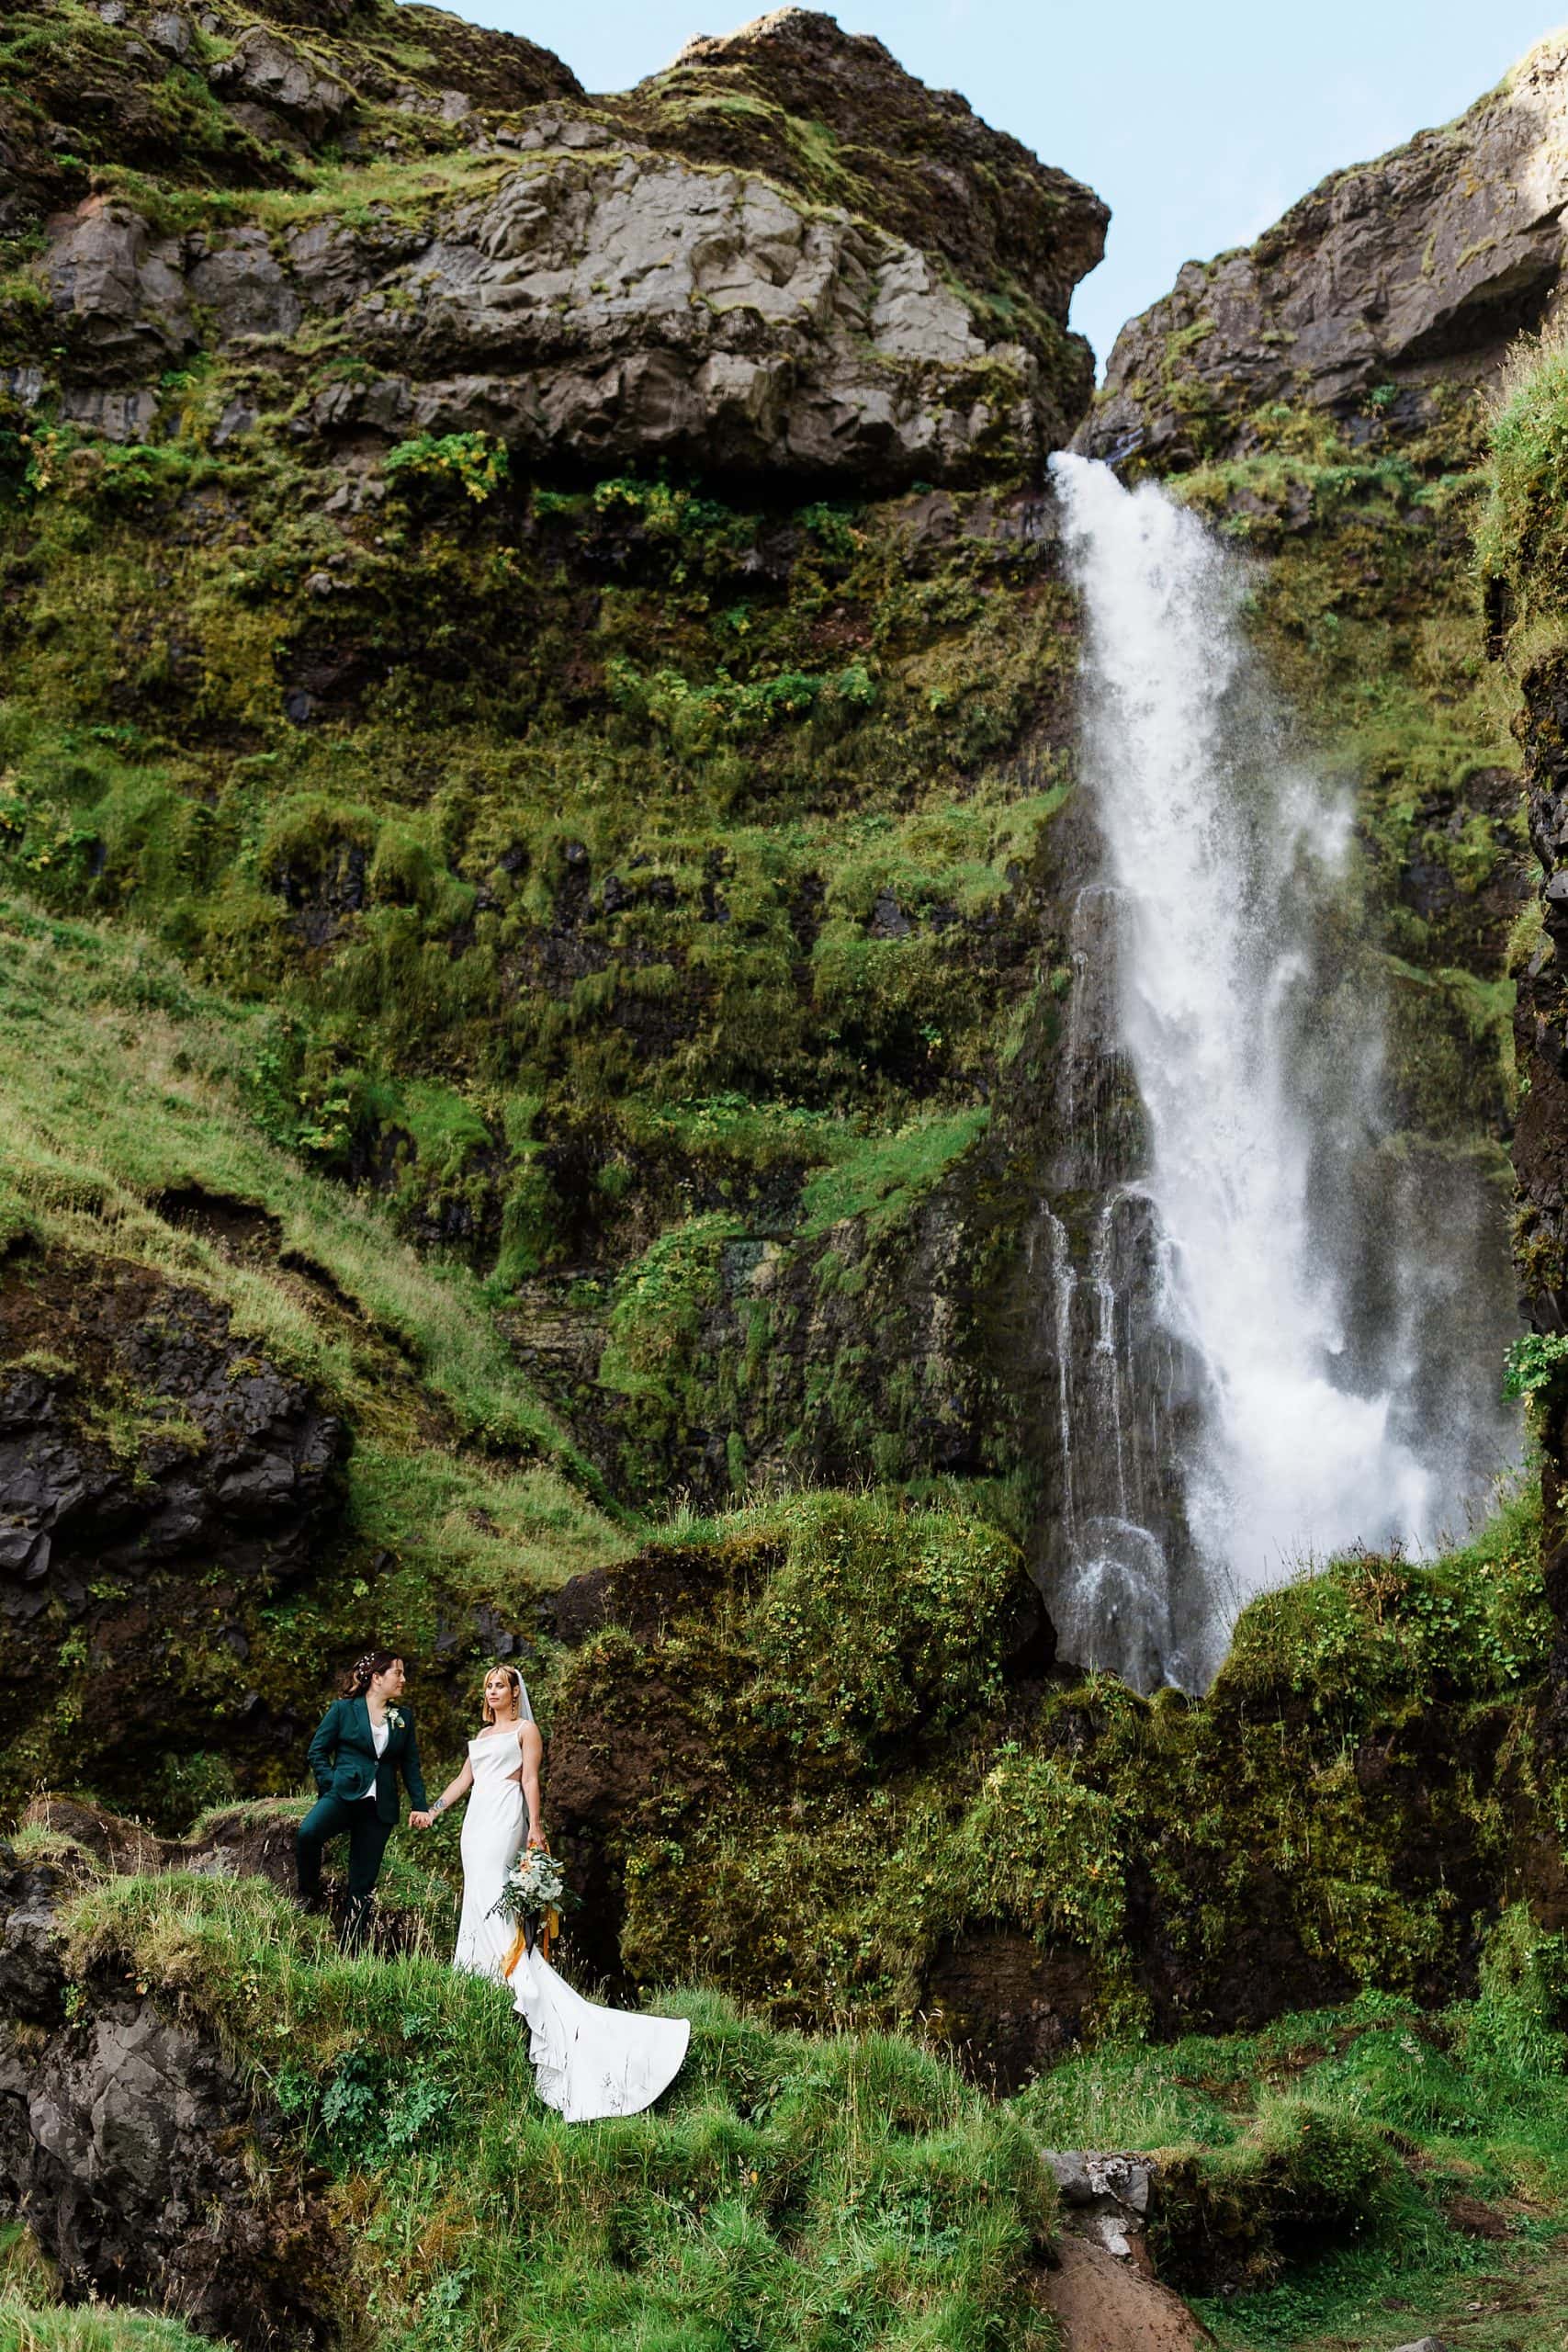 Newlyweds hold hands near a large waterfall after they elope in Iceland